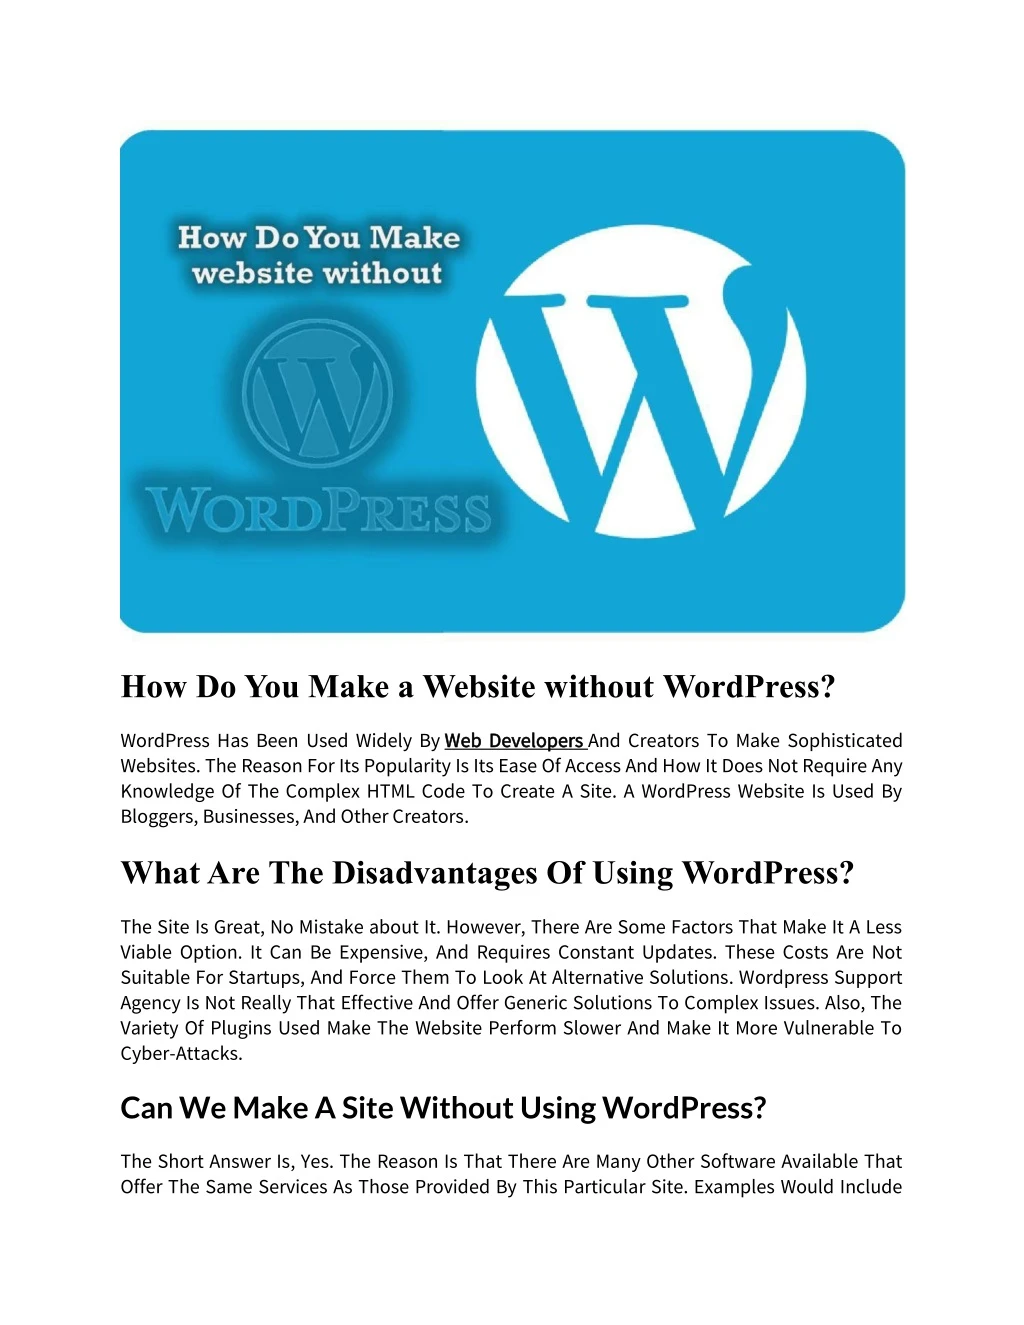 how do you make a website without wordpress